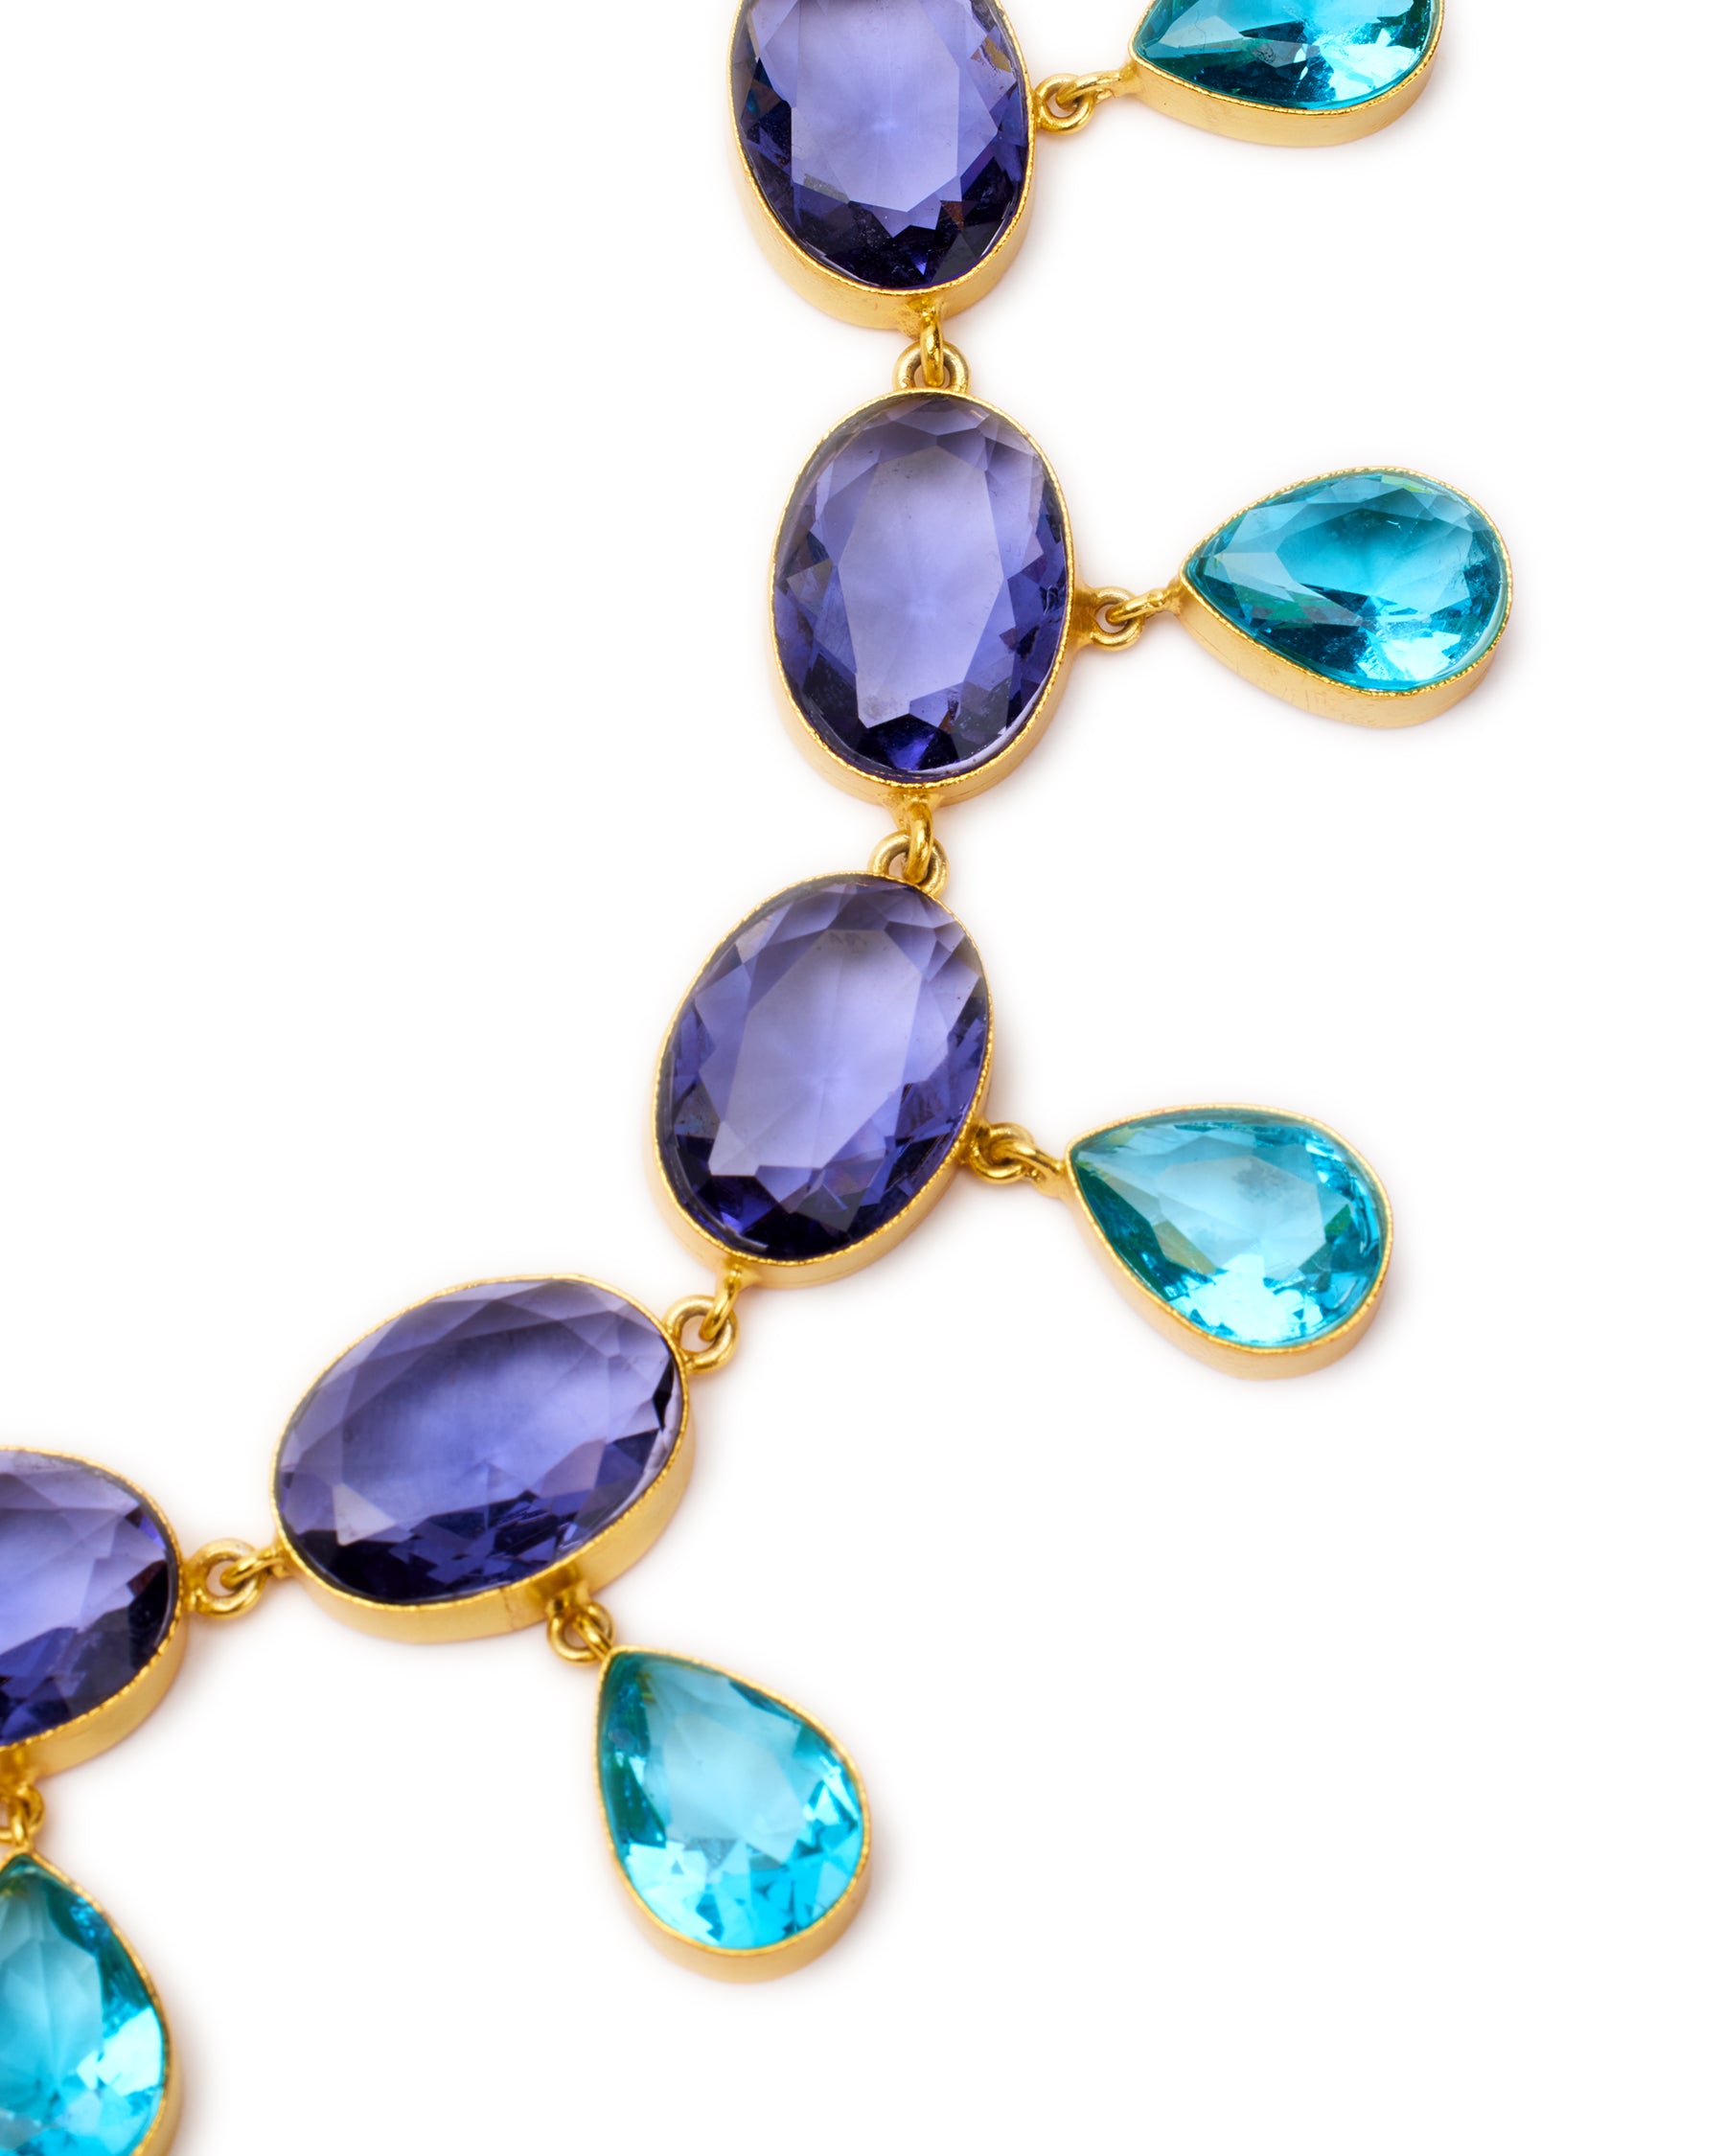 Chiara Dewdrop Necklace in Amethyst Purple and Crystal Blue-Detail